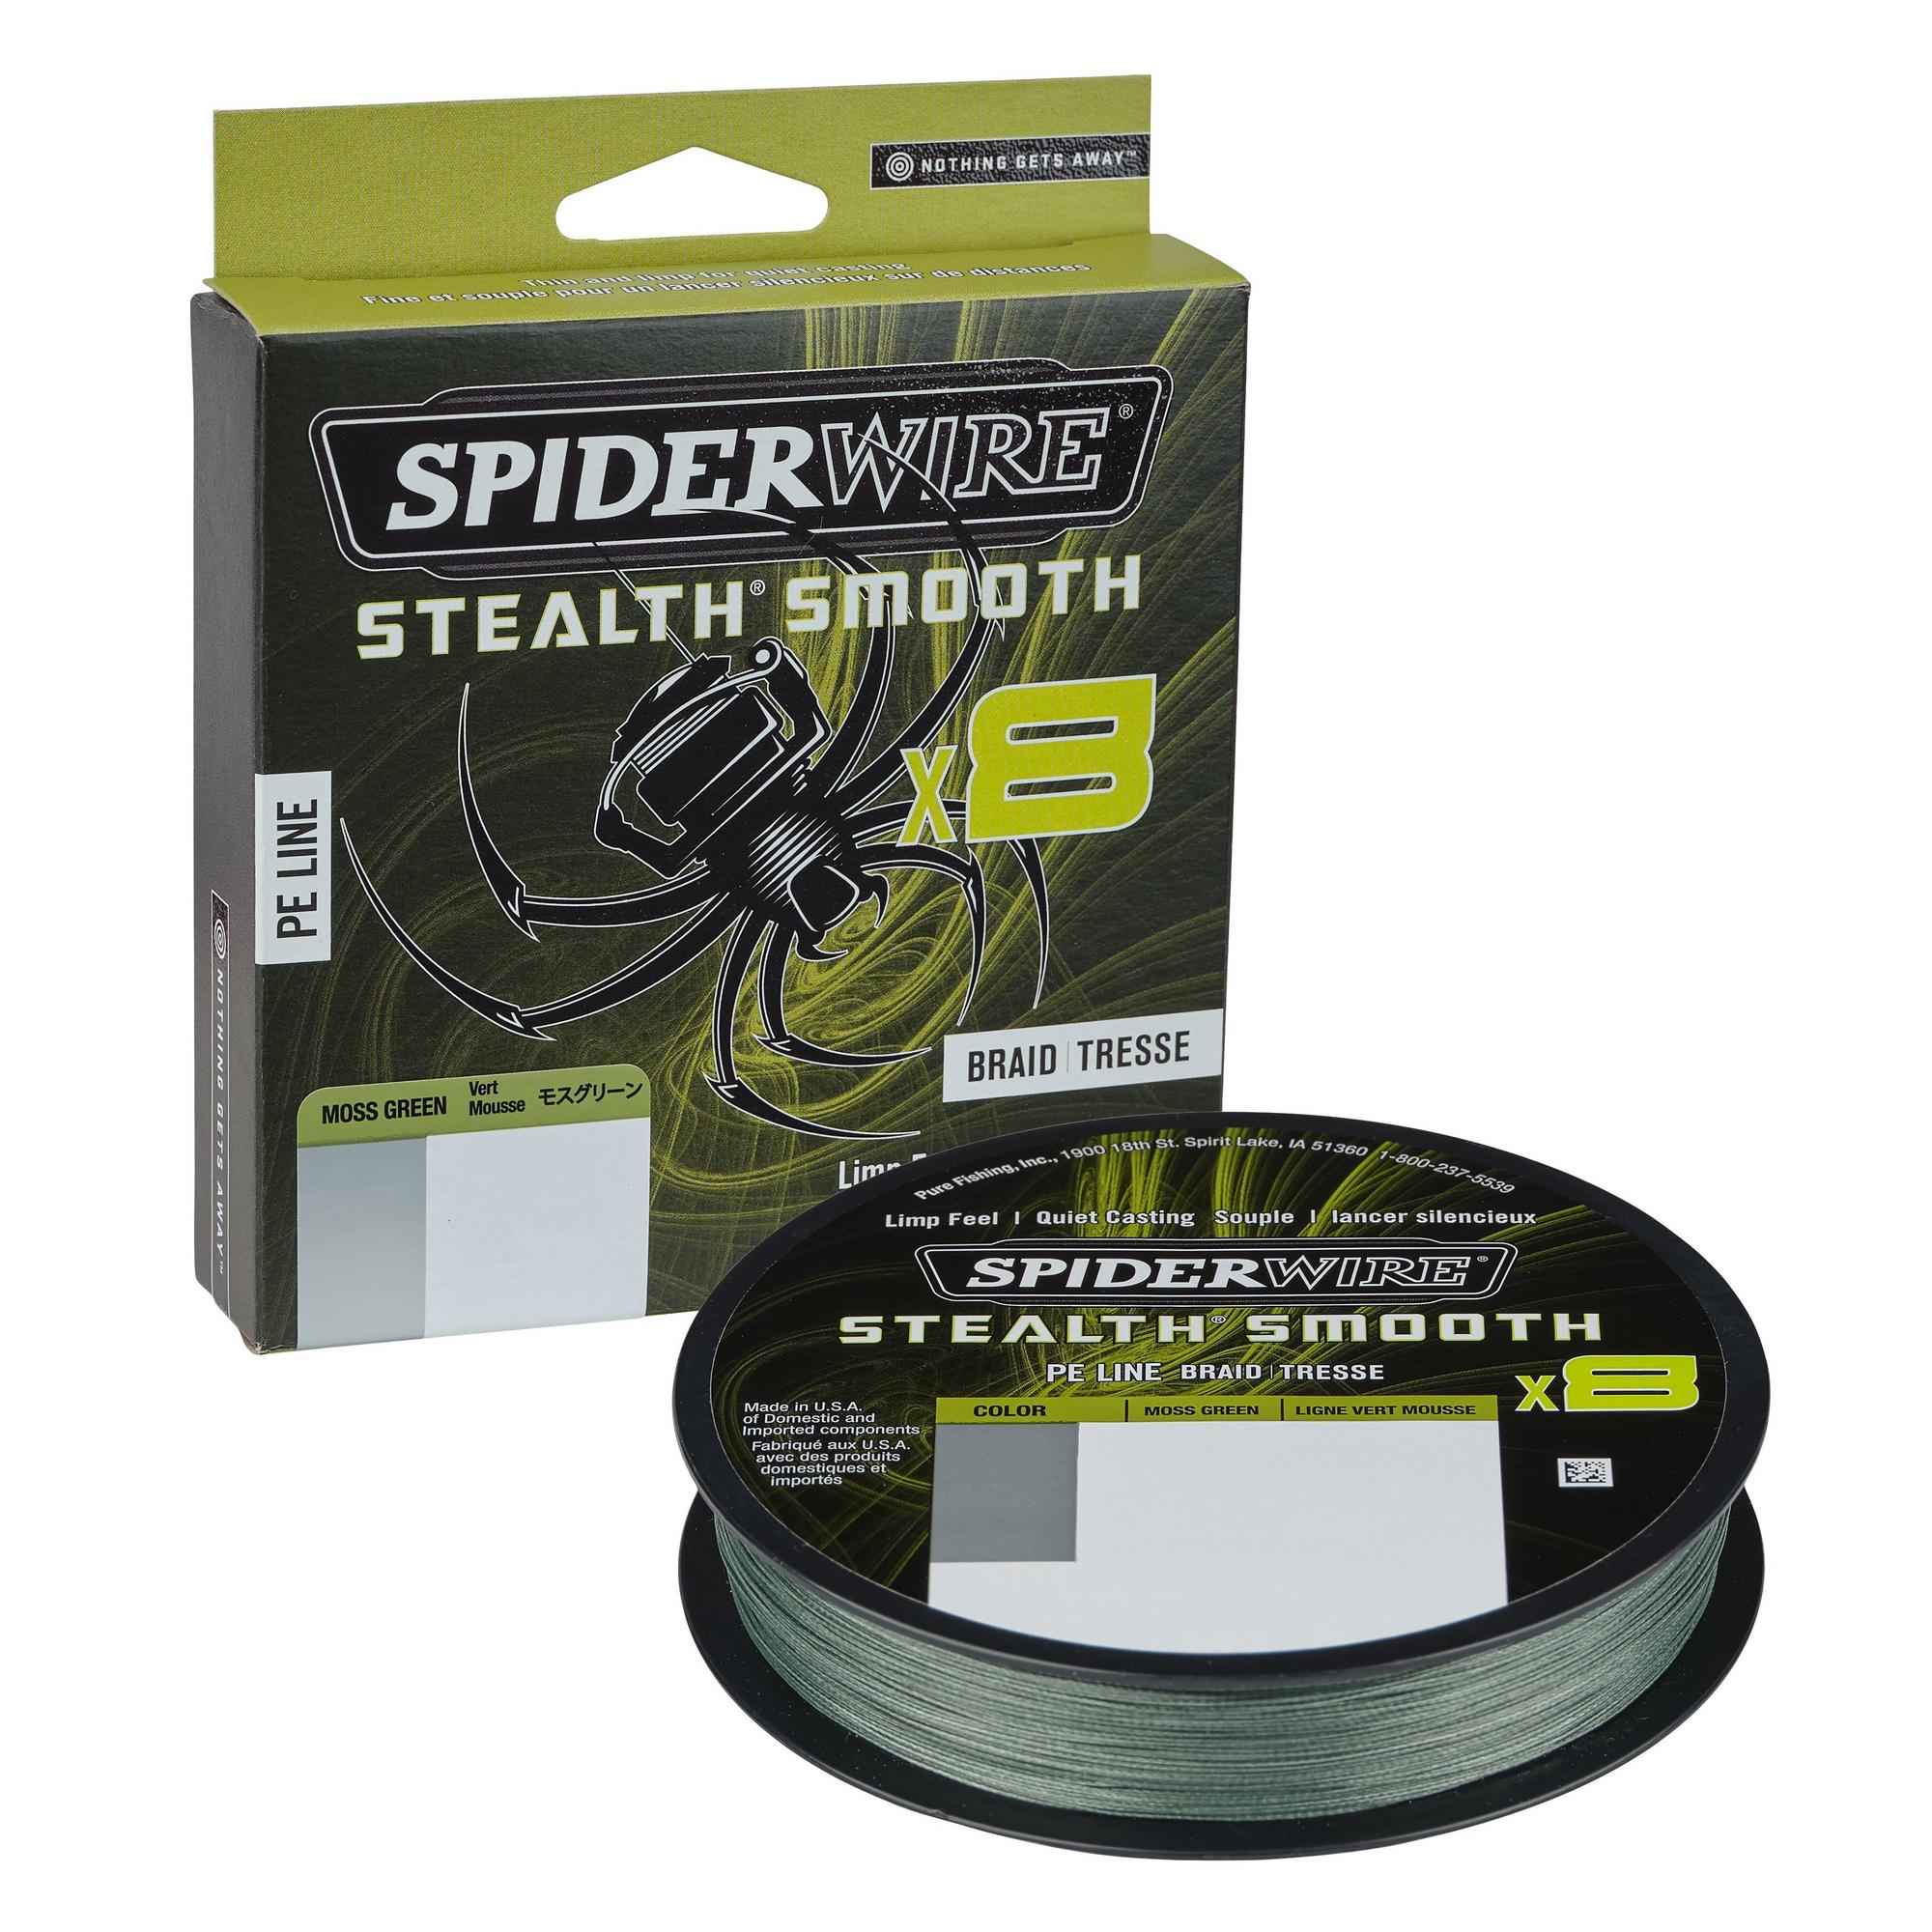 Spiderwire Stealth Smooth 8 Moss Green Braided Line (150m)